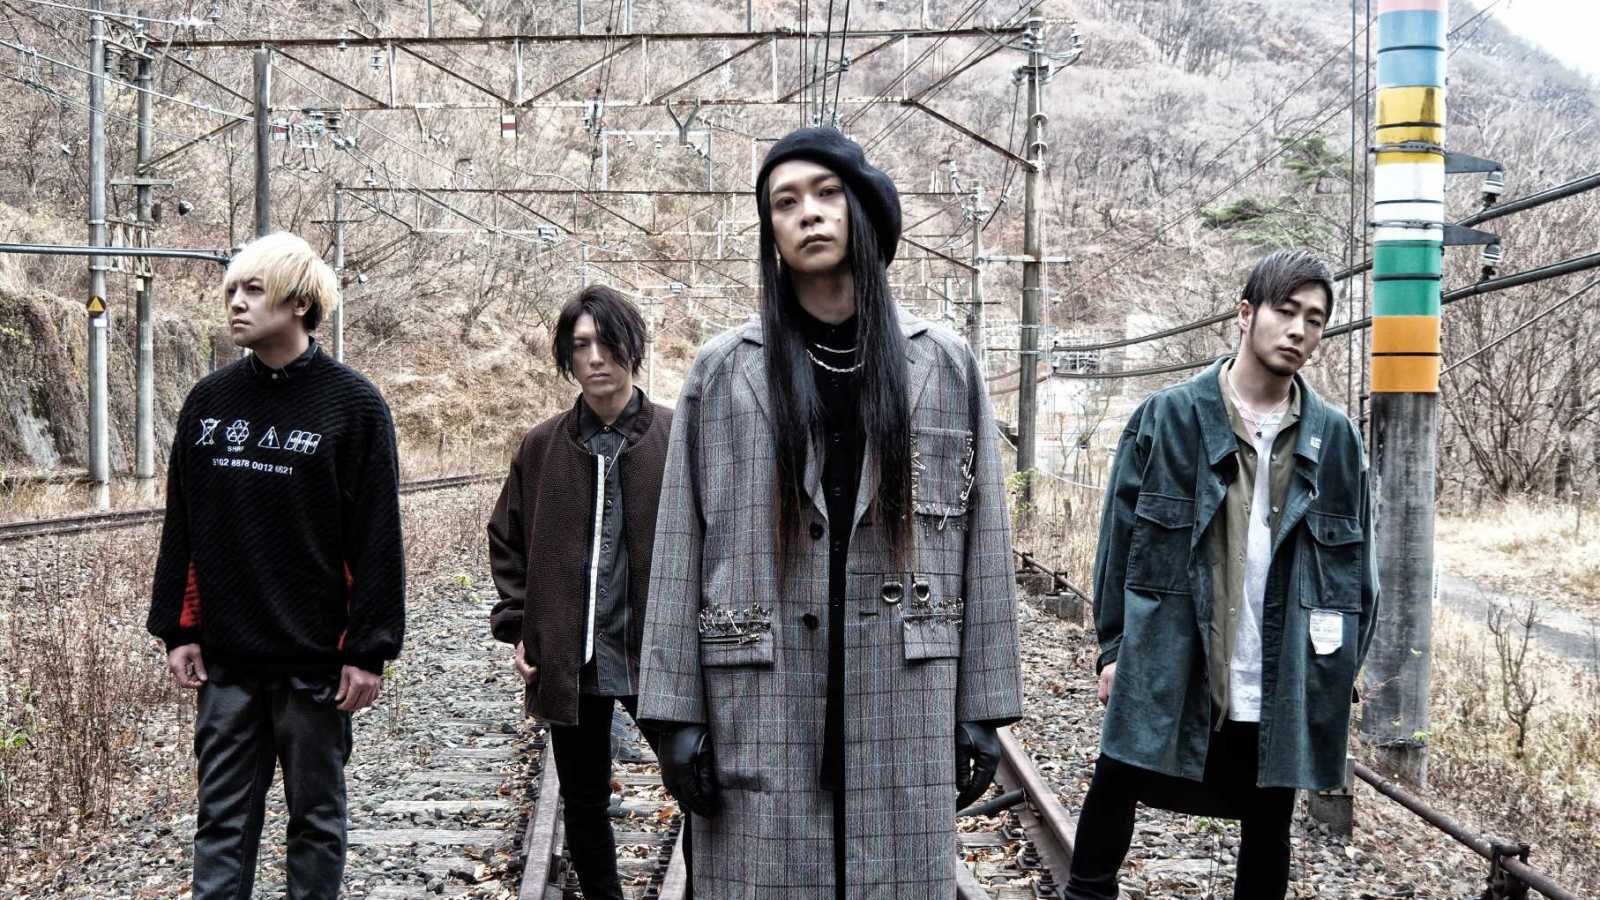 SATOchi to Leave MUCC © MUCC. All rights reserved.